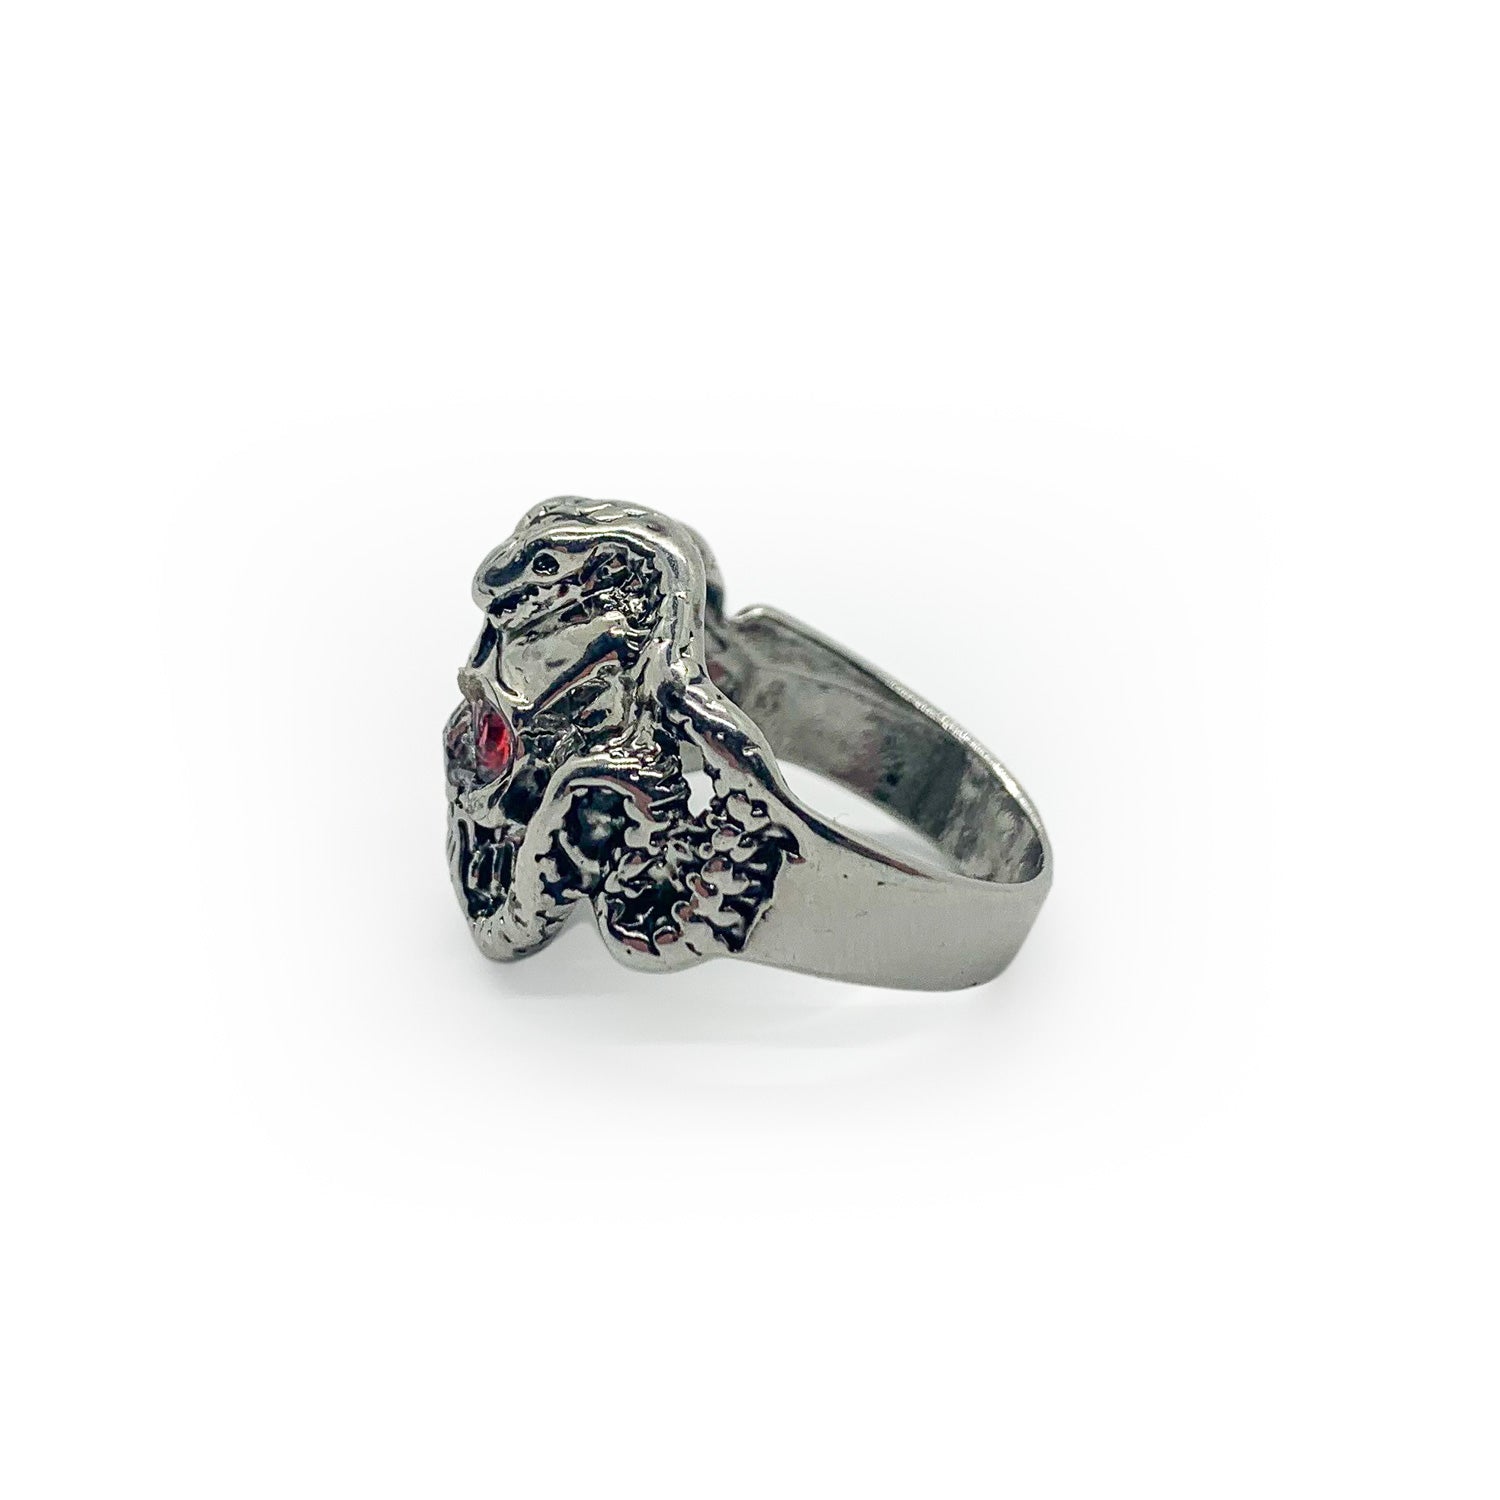 Cobra Skull Stainless Steel Ring with Red Ruby Inlay - US Size 13